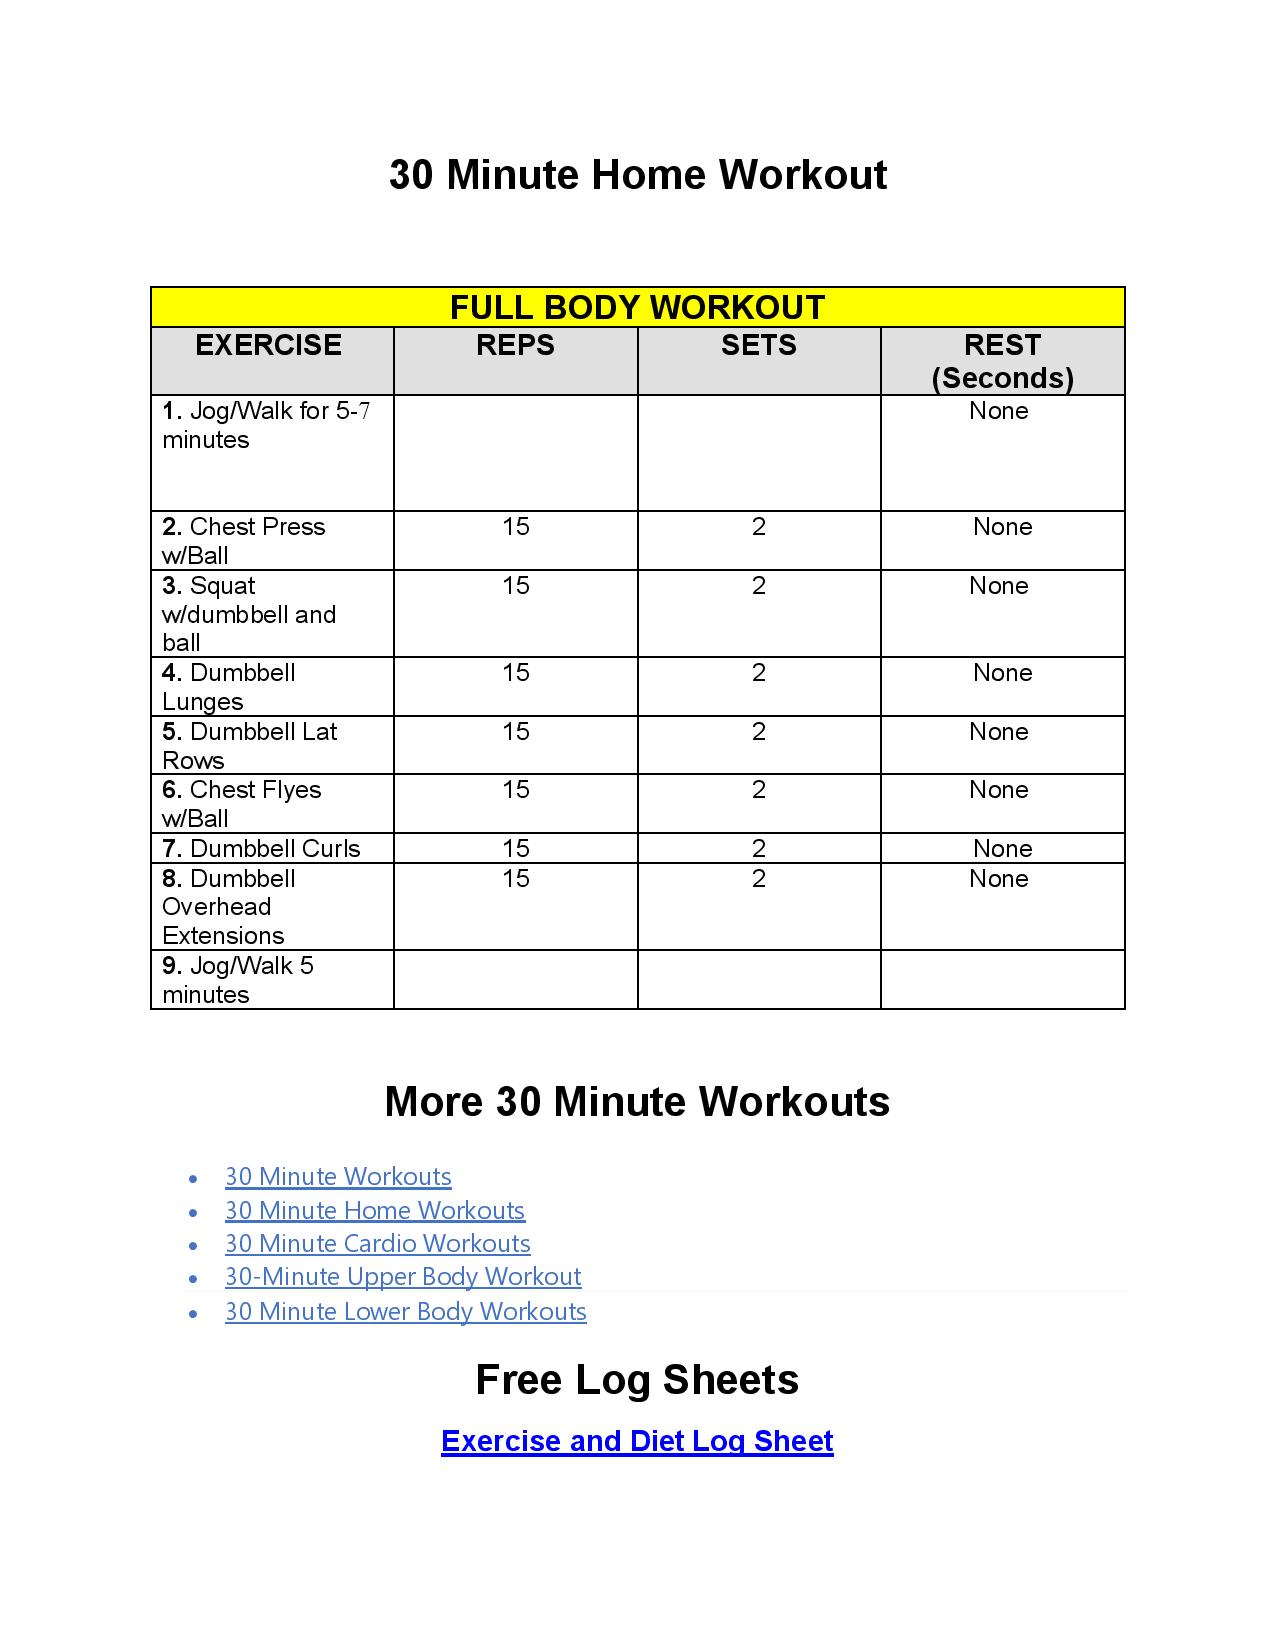 30 minute home fullbody sample workout.